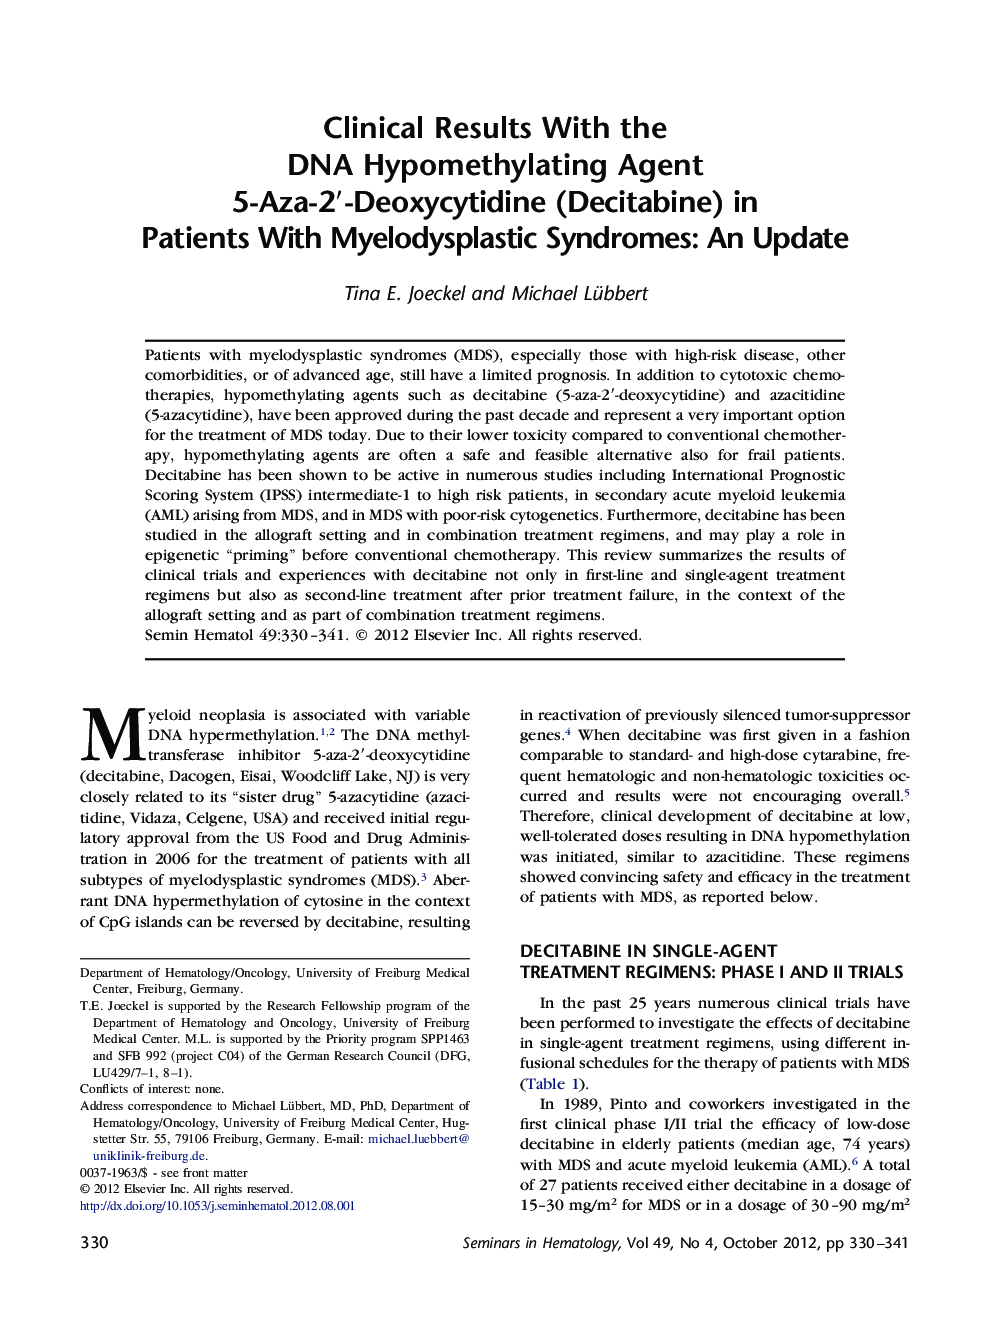 Clinical Results With the DNA Hypomethylating Agent 5-Aza-2′-Deoxycytidine (Decitabine) in Patients With Myelodysplastic Syndromes: An Update 